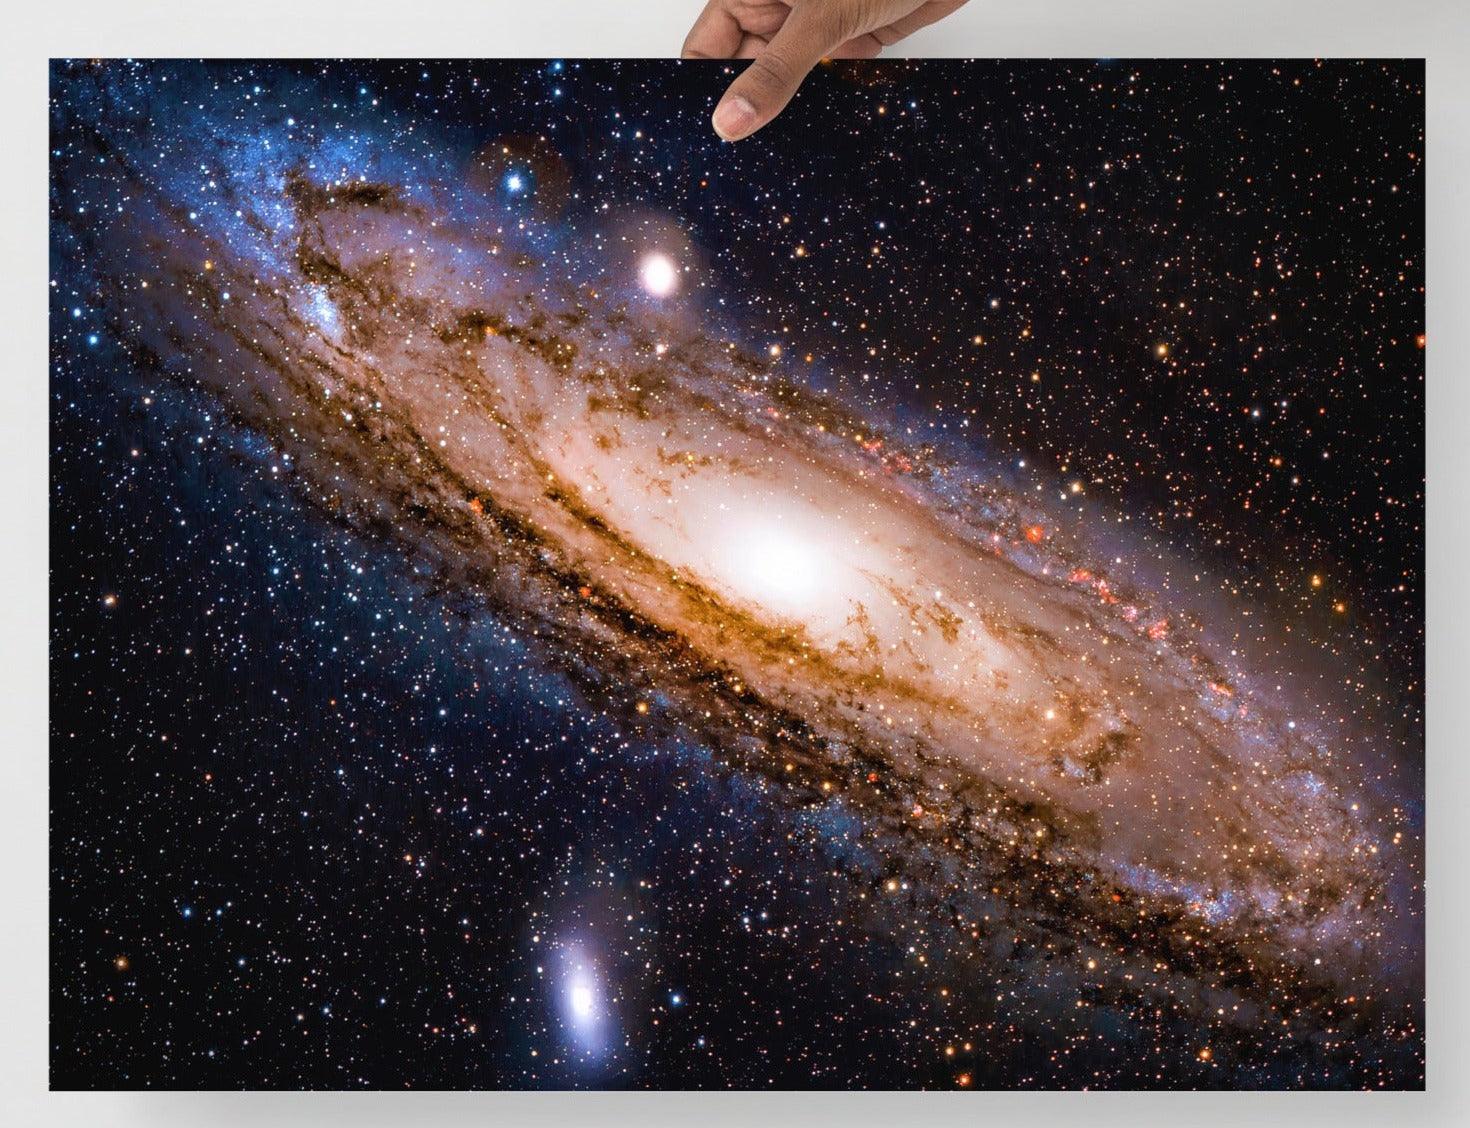 An Andromeda Galaxy poster on a plain backdrop in size 18x24”.